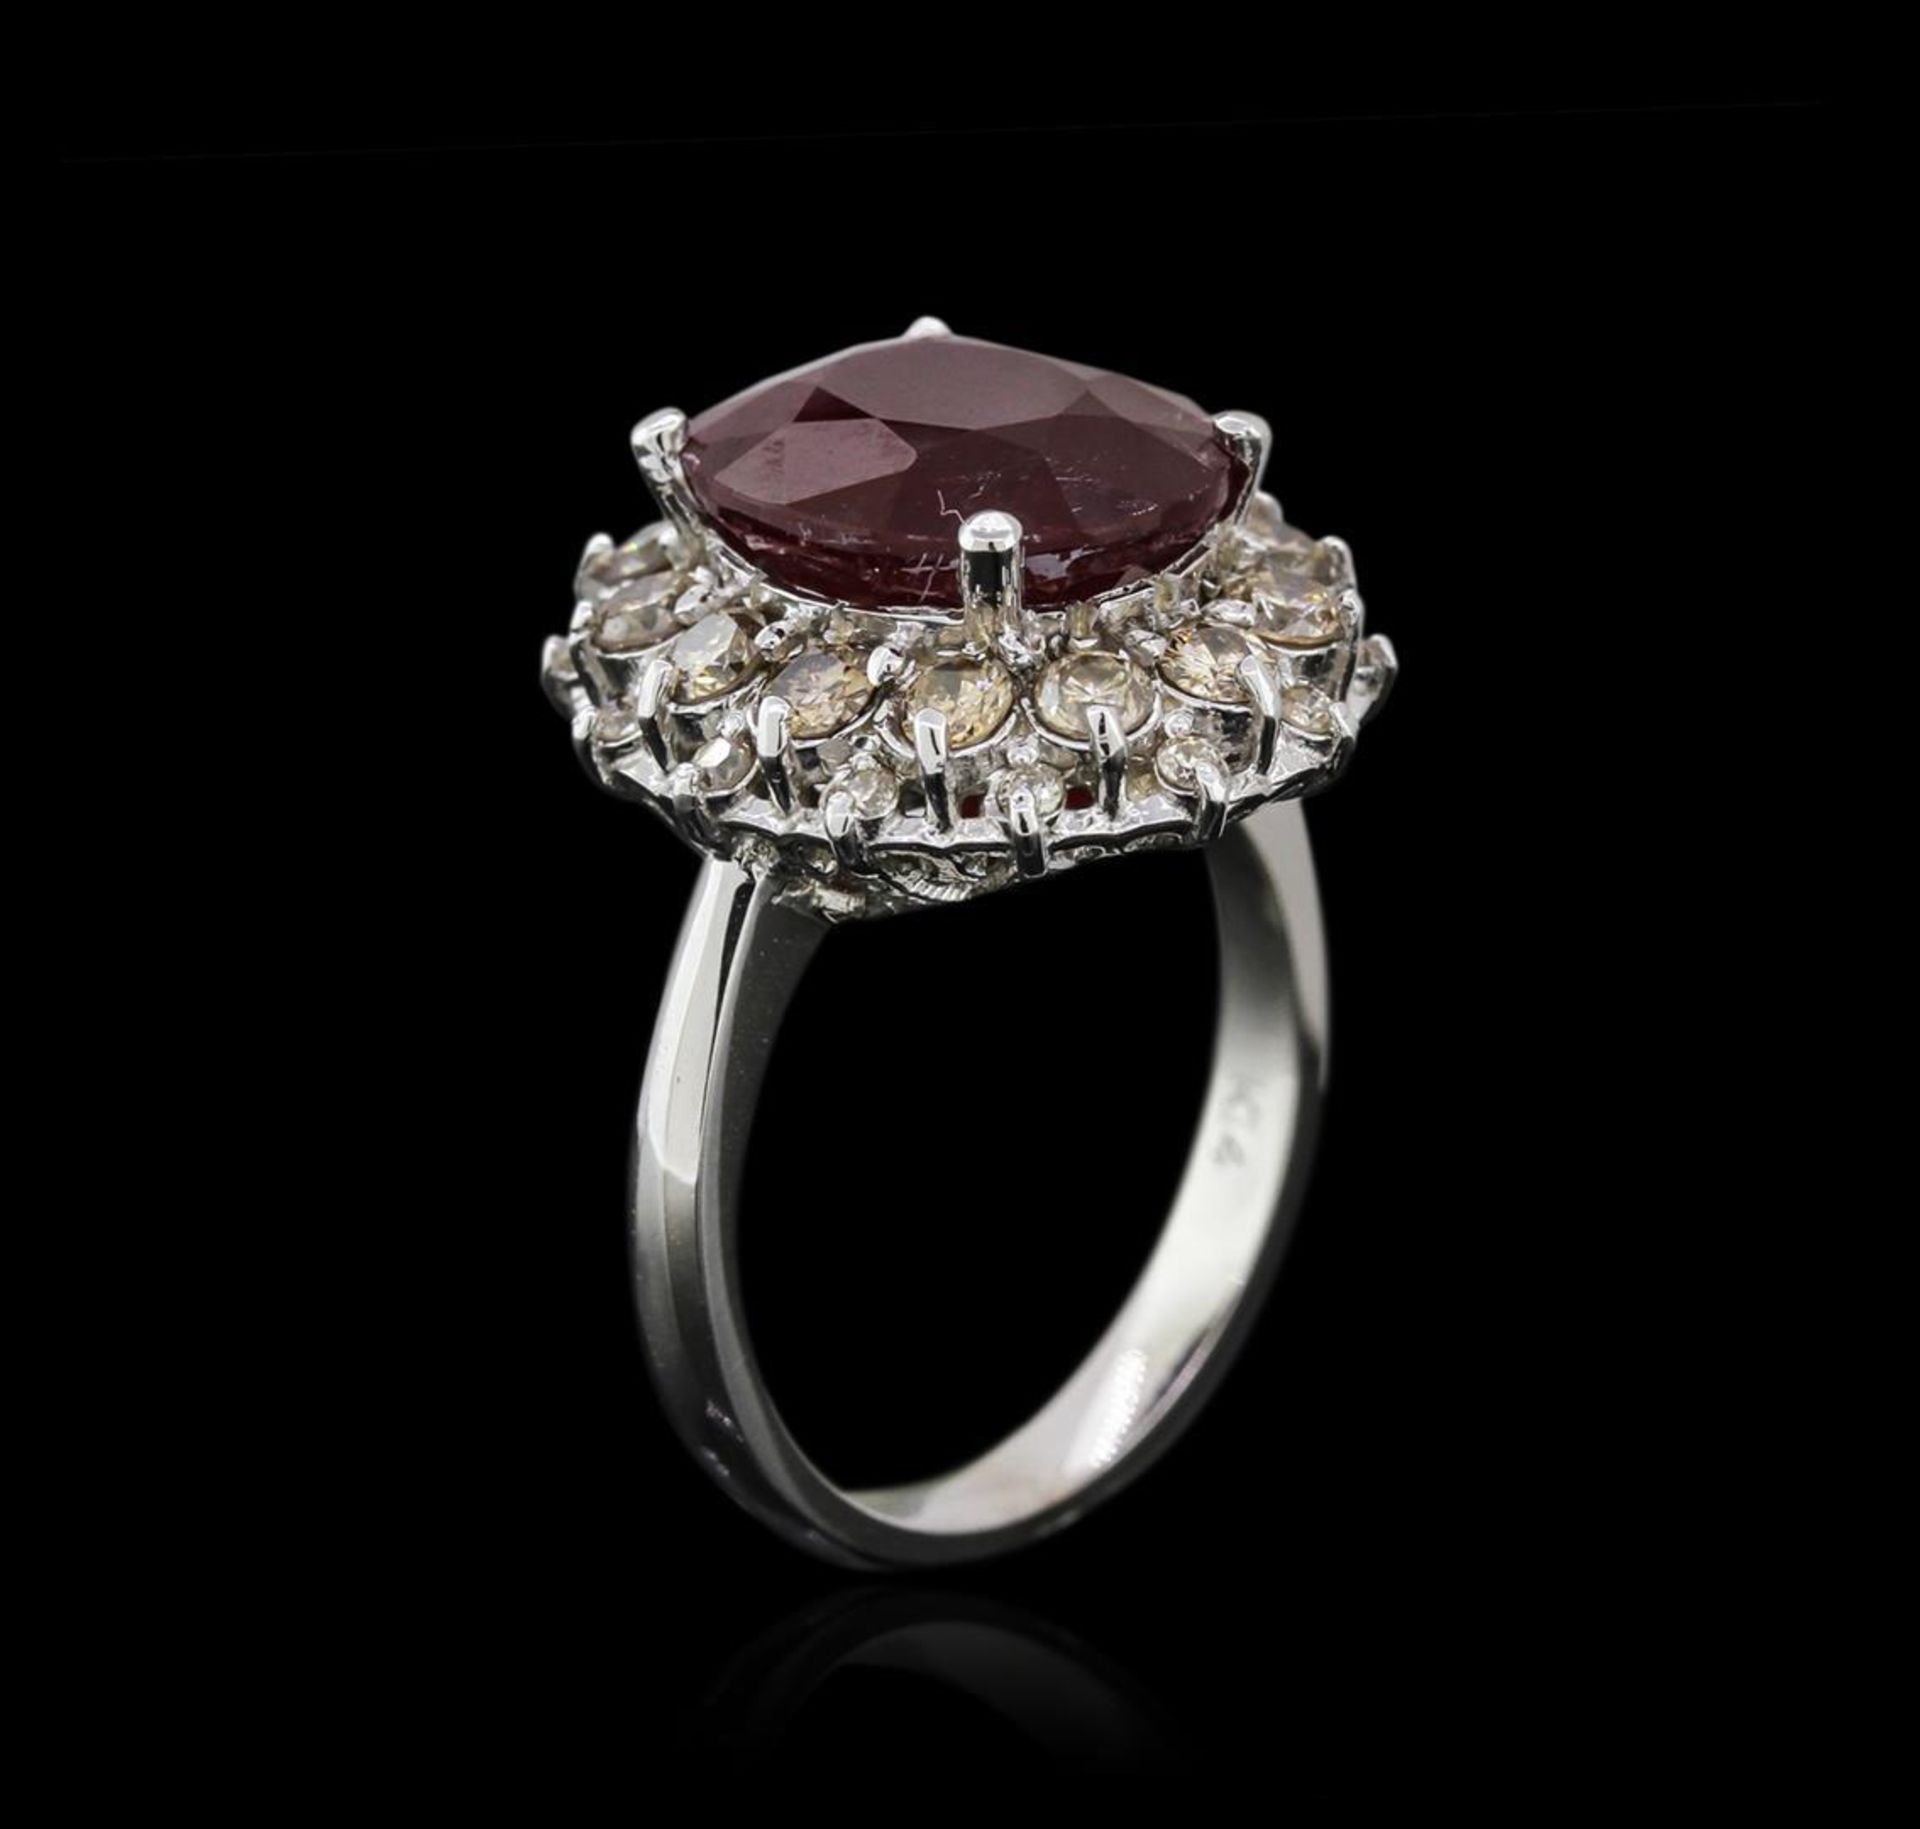 14KT White Gold 6.16 ctw Ruby and Diamond Ring - Image 3 of 4